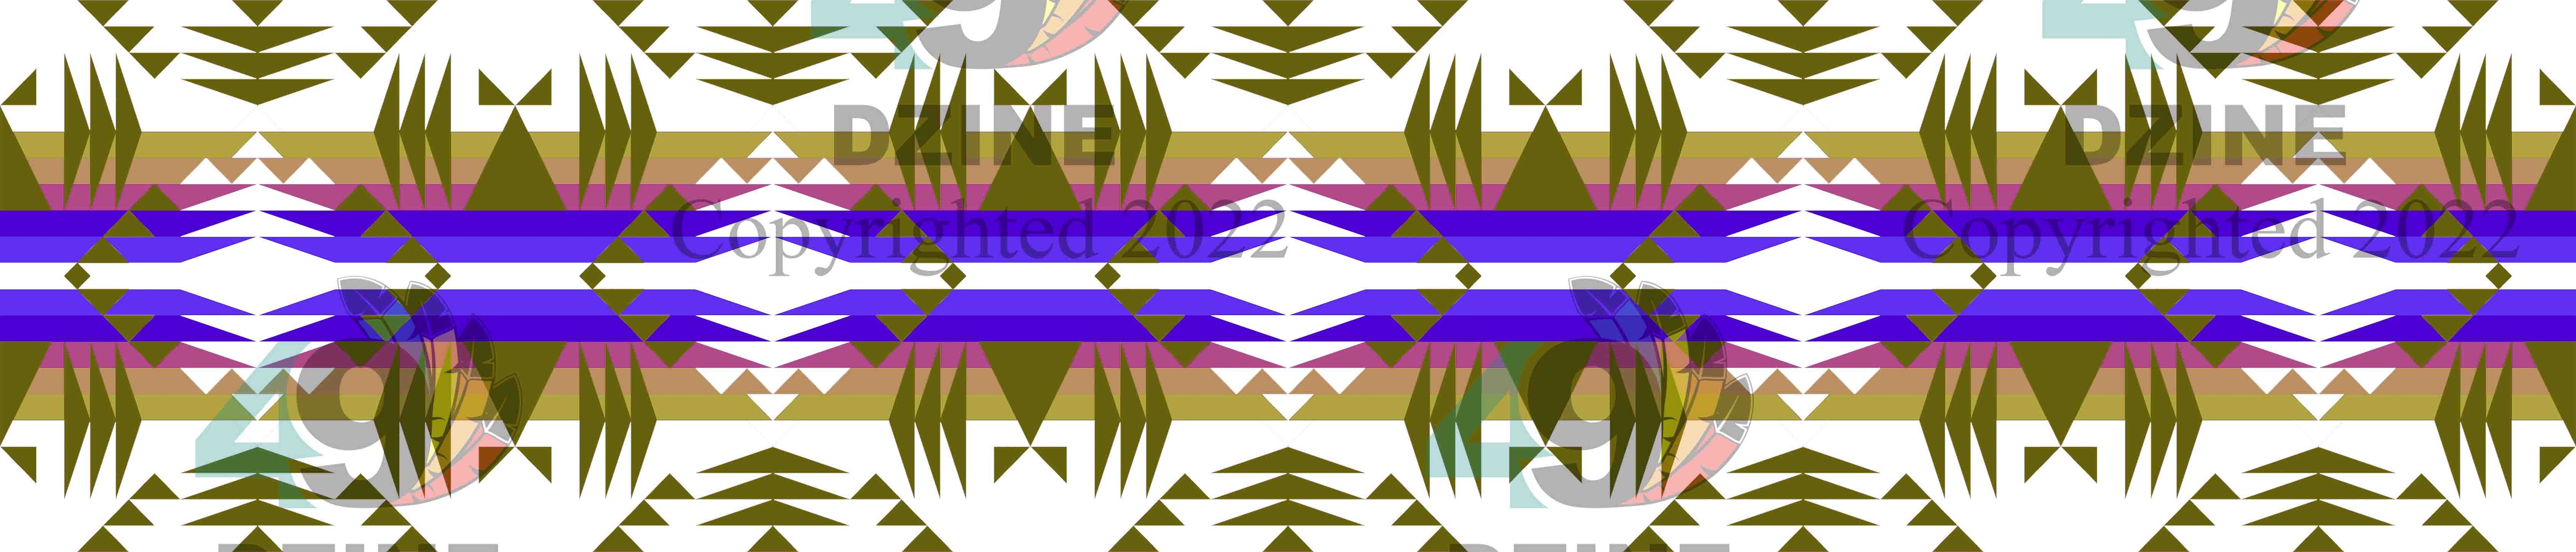 11-inch Geometric Transfer Between the Mountains Strip